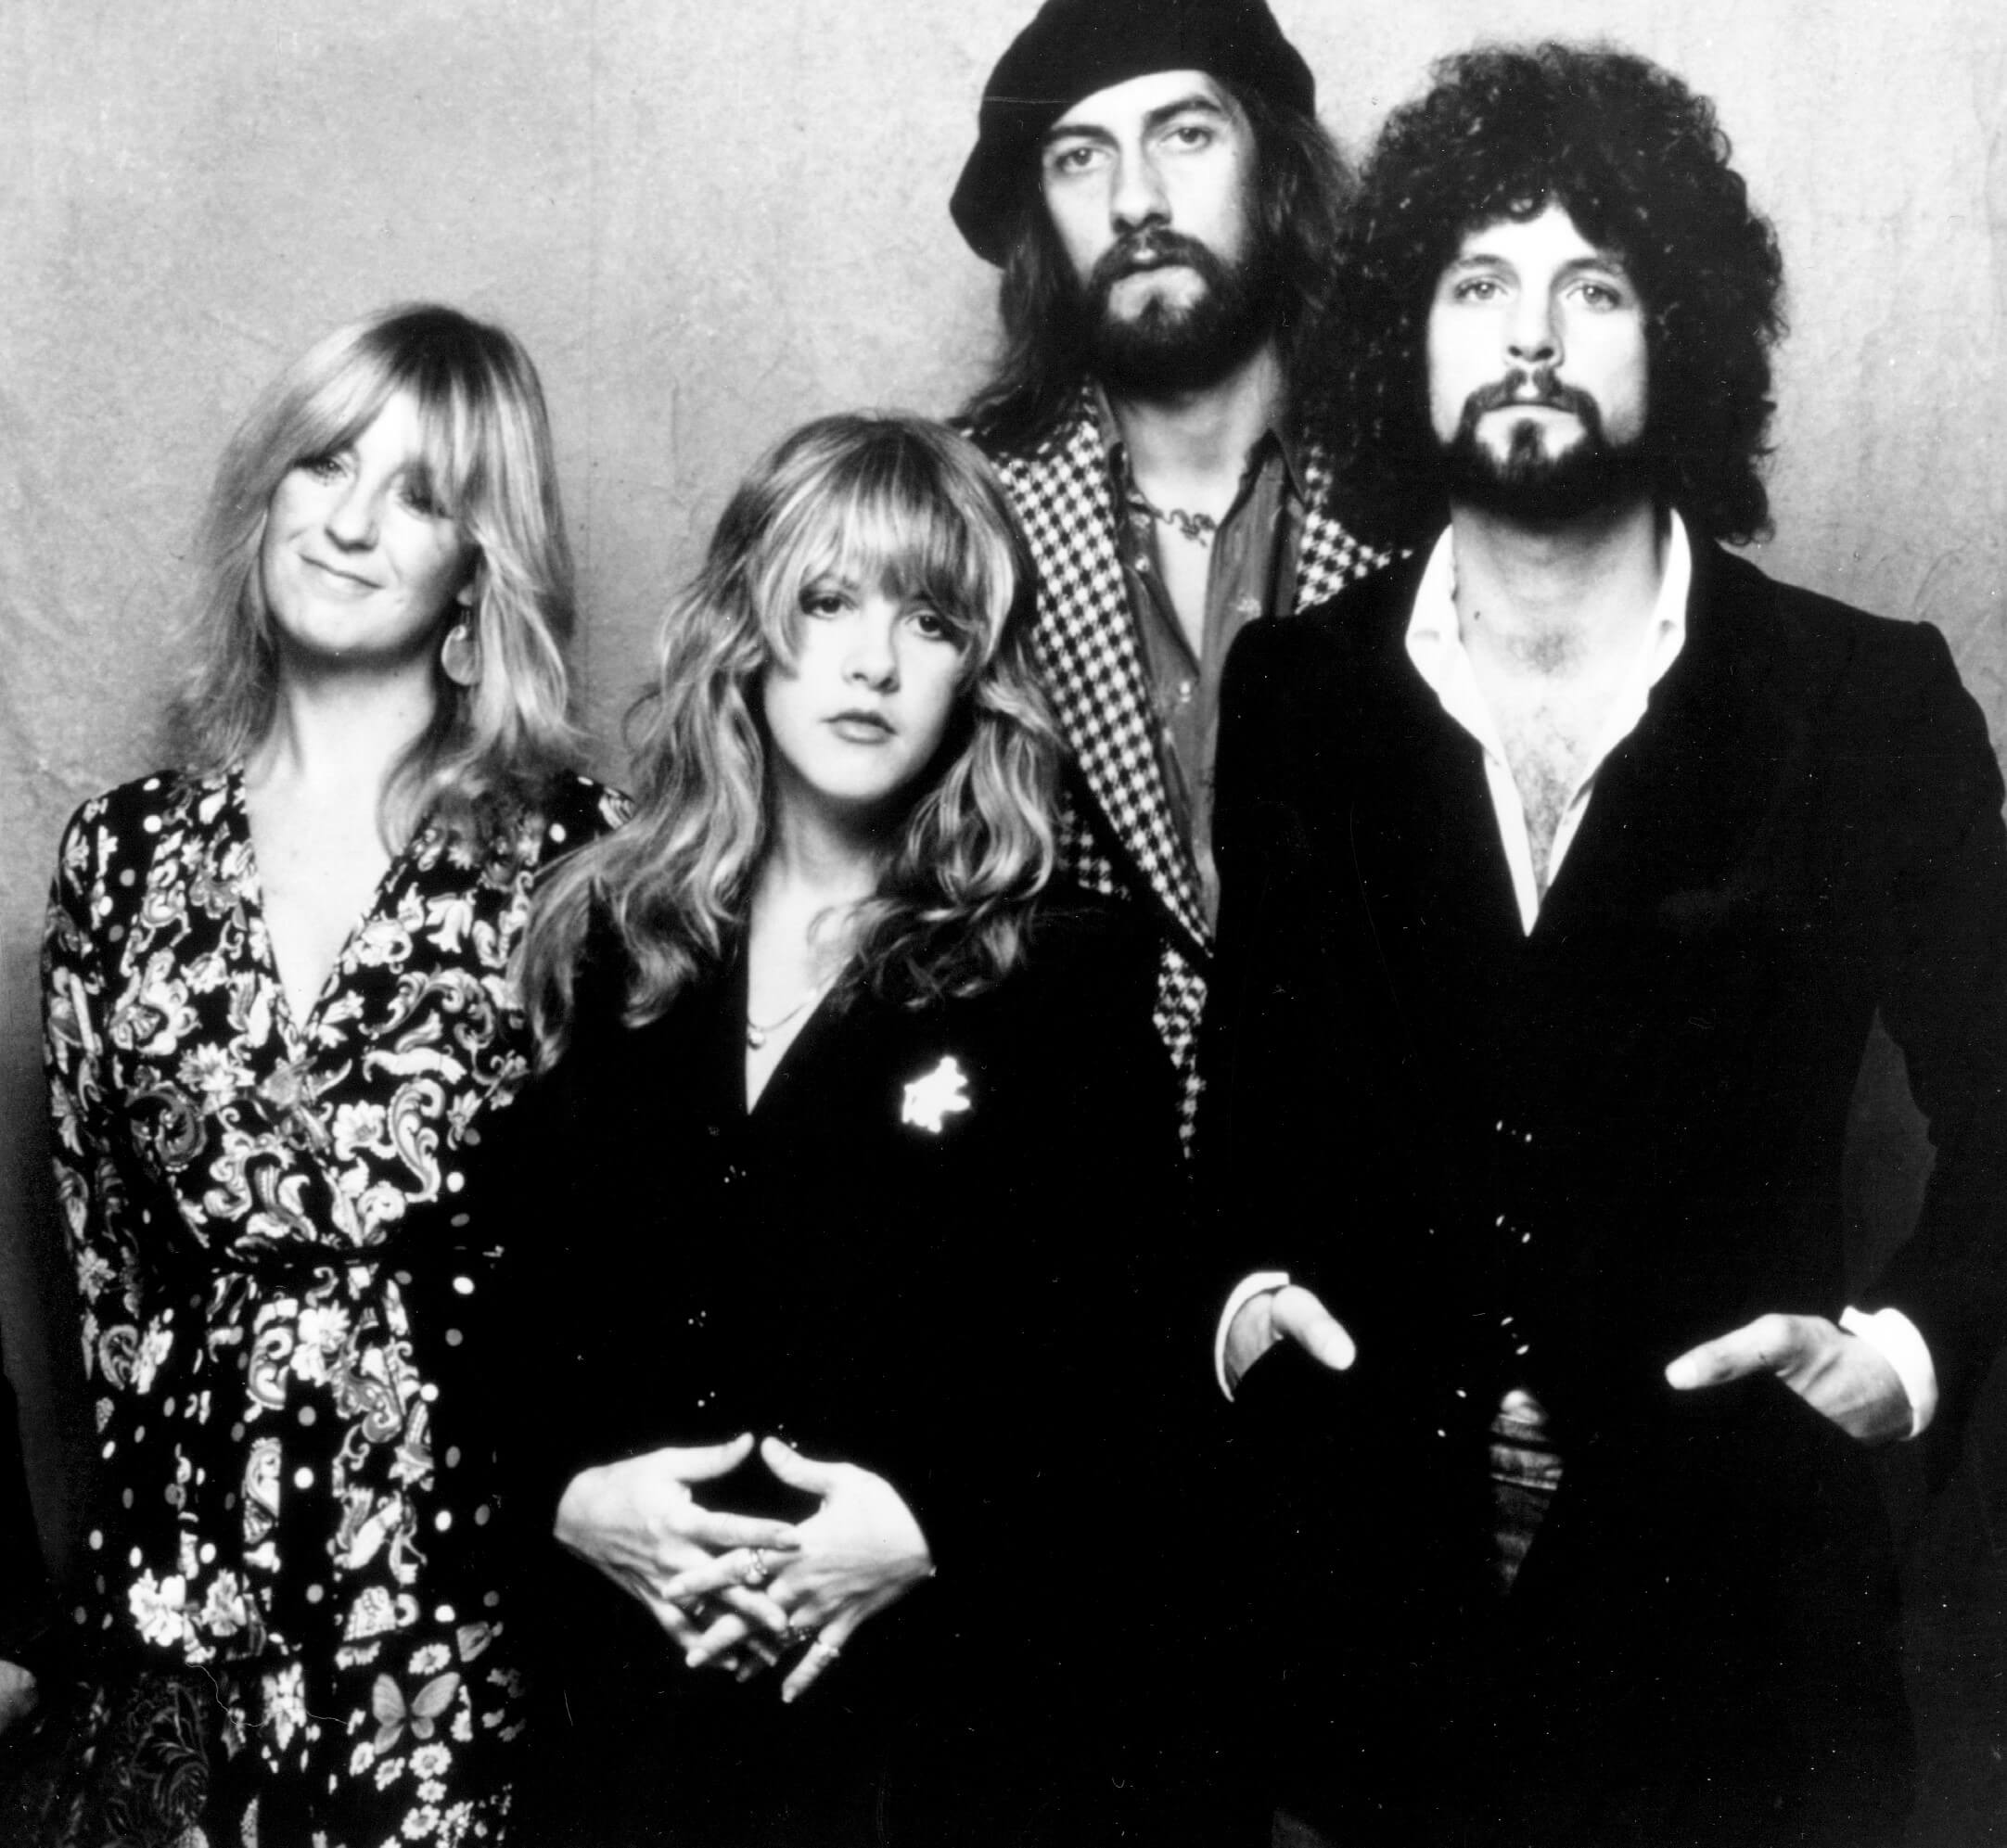 Fleetwood Mac, a band behind many classic rock songs, in black-and-white